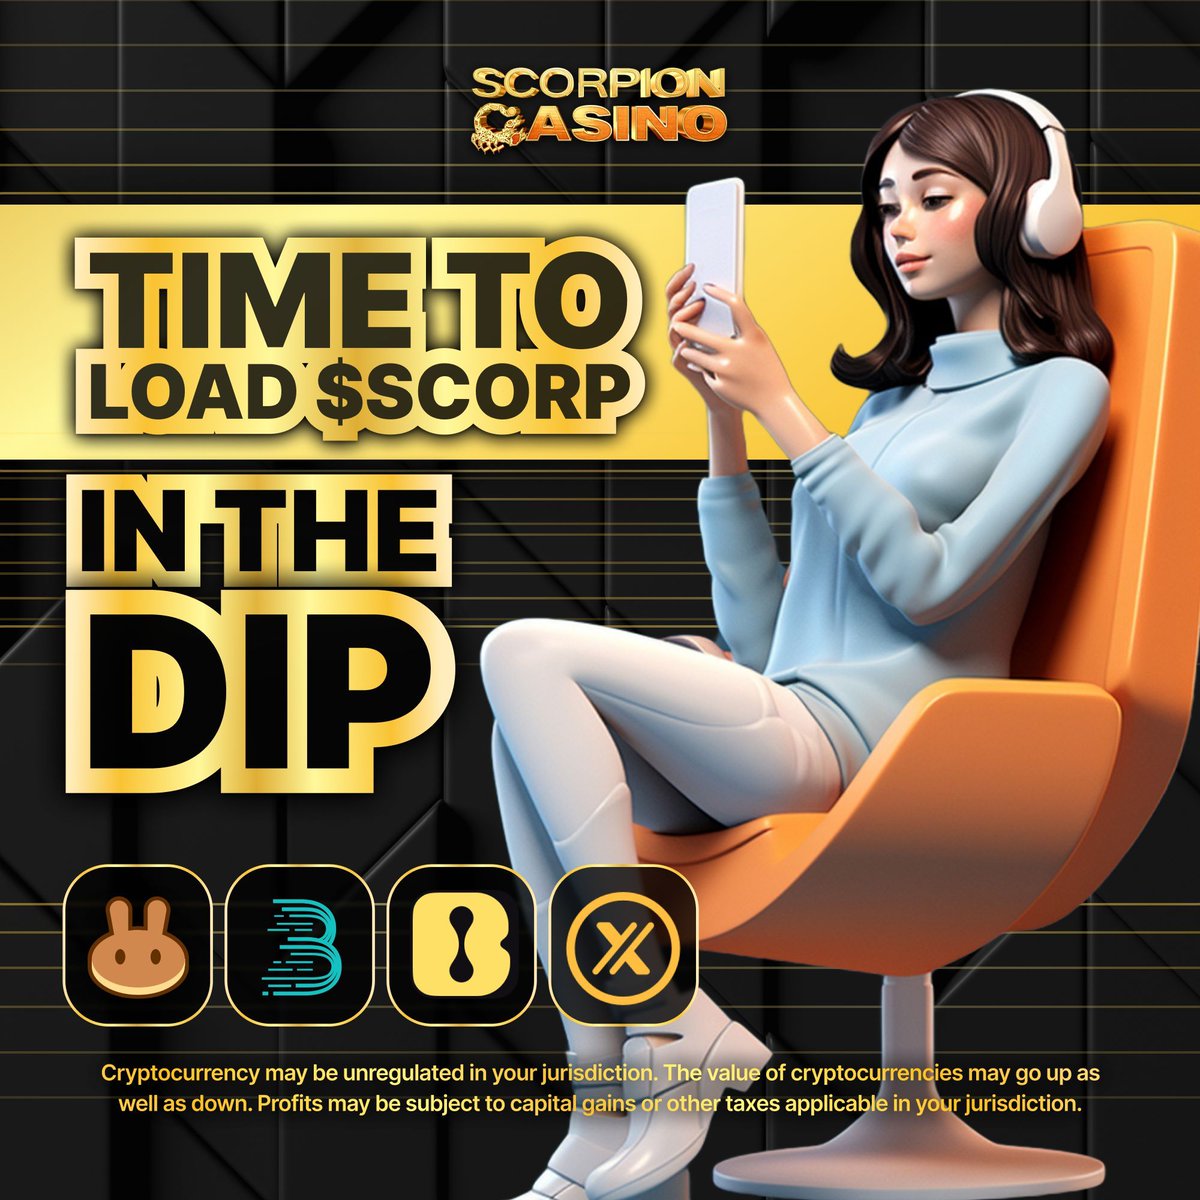 GOLDEN CHANCE TO BUY CHEAP $SCORP 🏆 Imagine earning daily USDT rewards HOLDING $SCORP, through an INTERNATIONAL CRYPTO CASINO! Buy now in the dip, because when the market moves, you'll regret it! 🧠😱 💵 Trade $SCORP with Lbank now: buff.ly/3WmfuCv